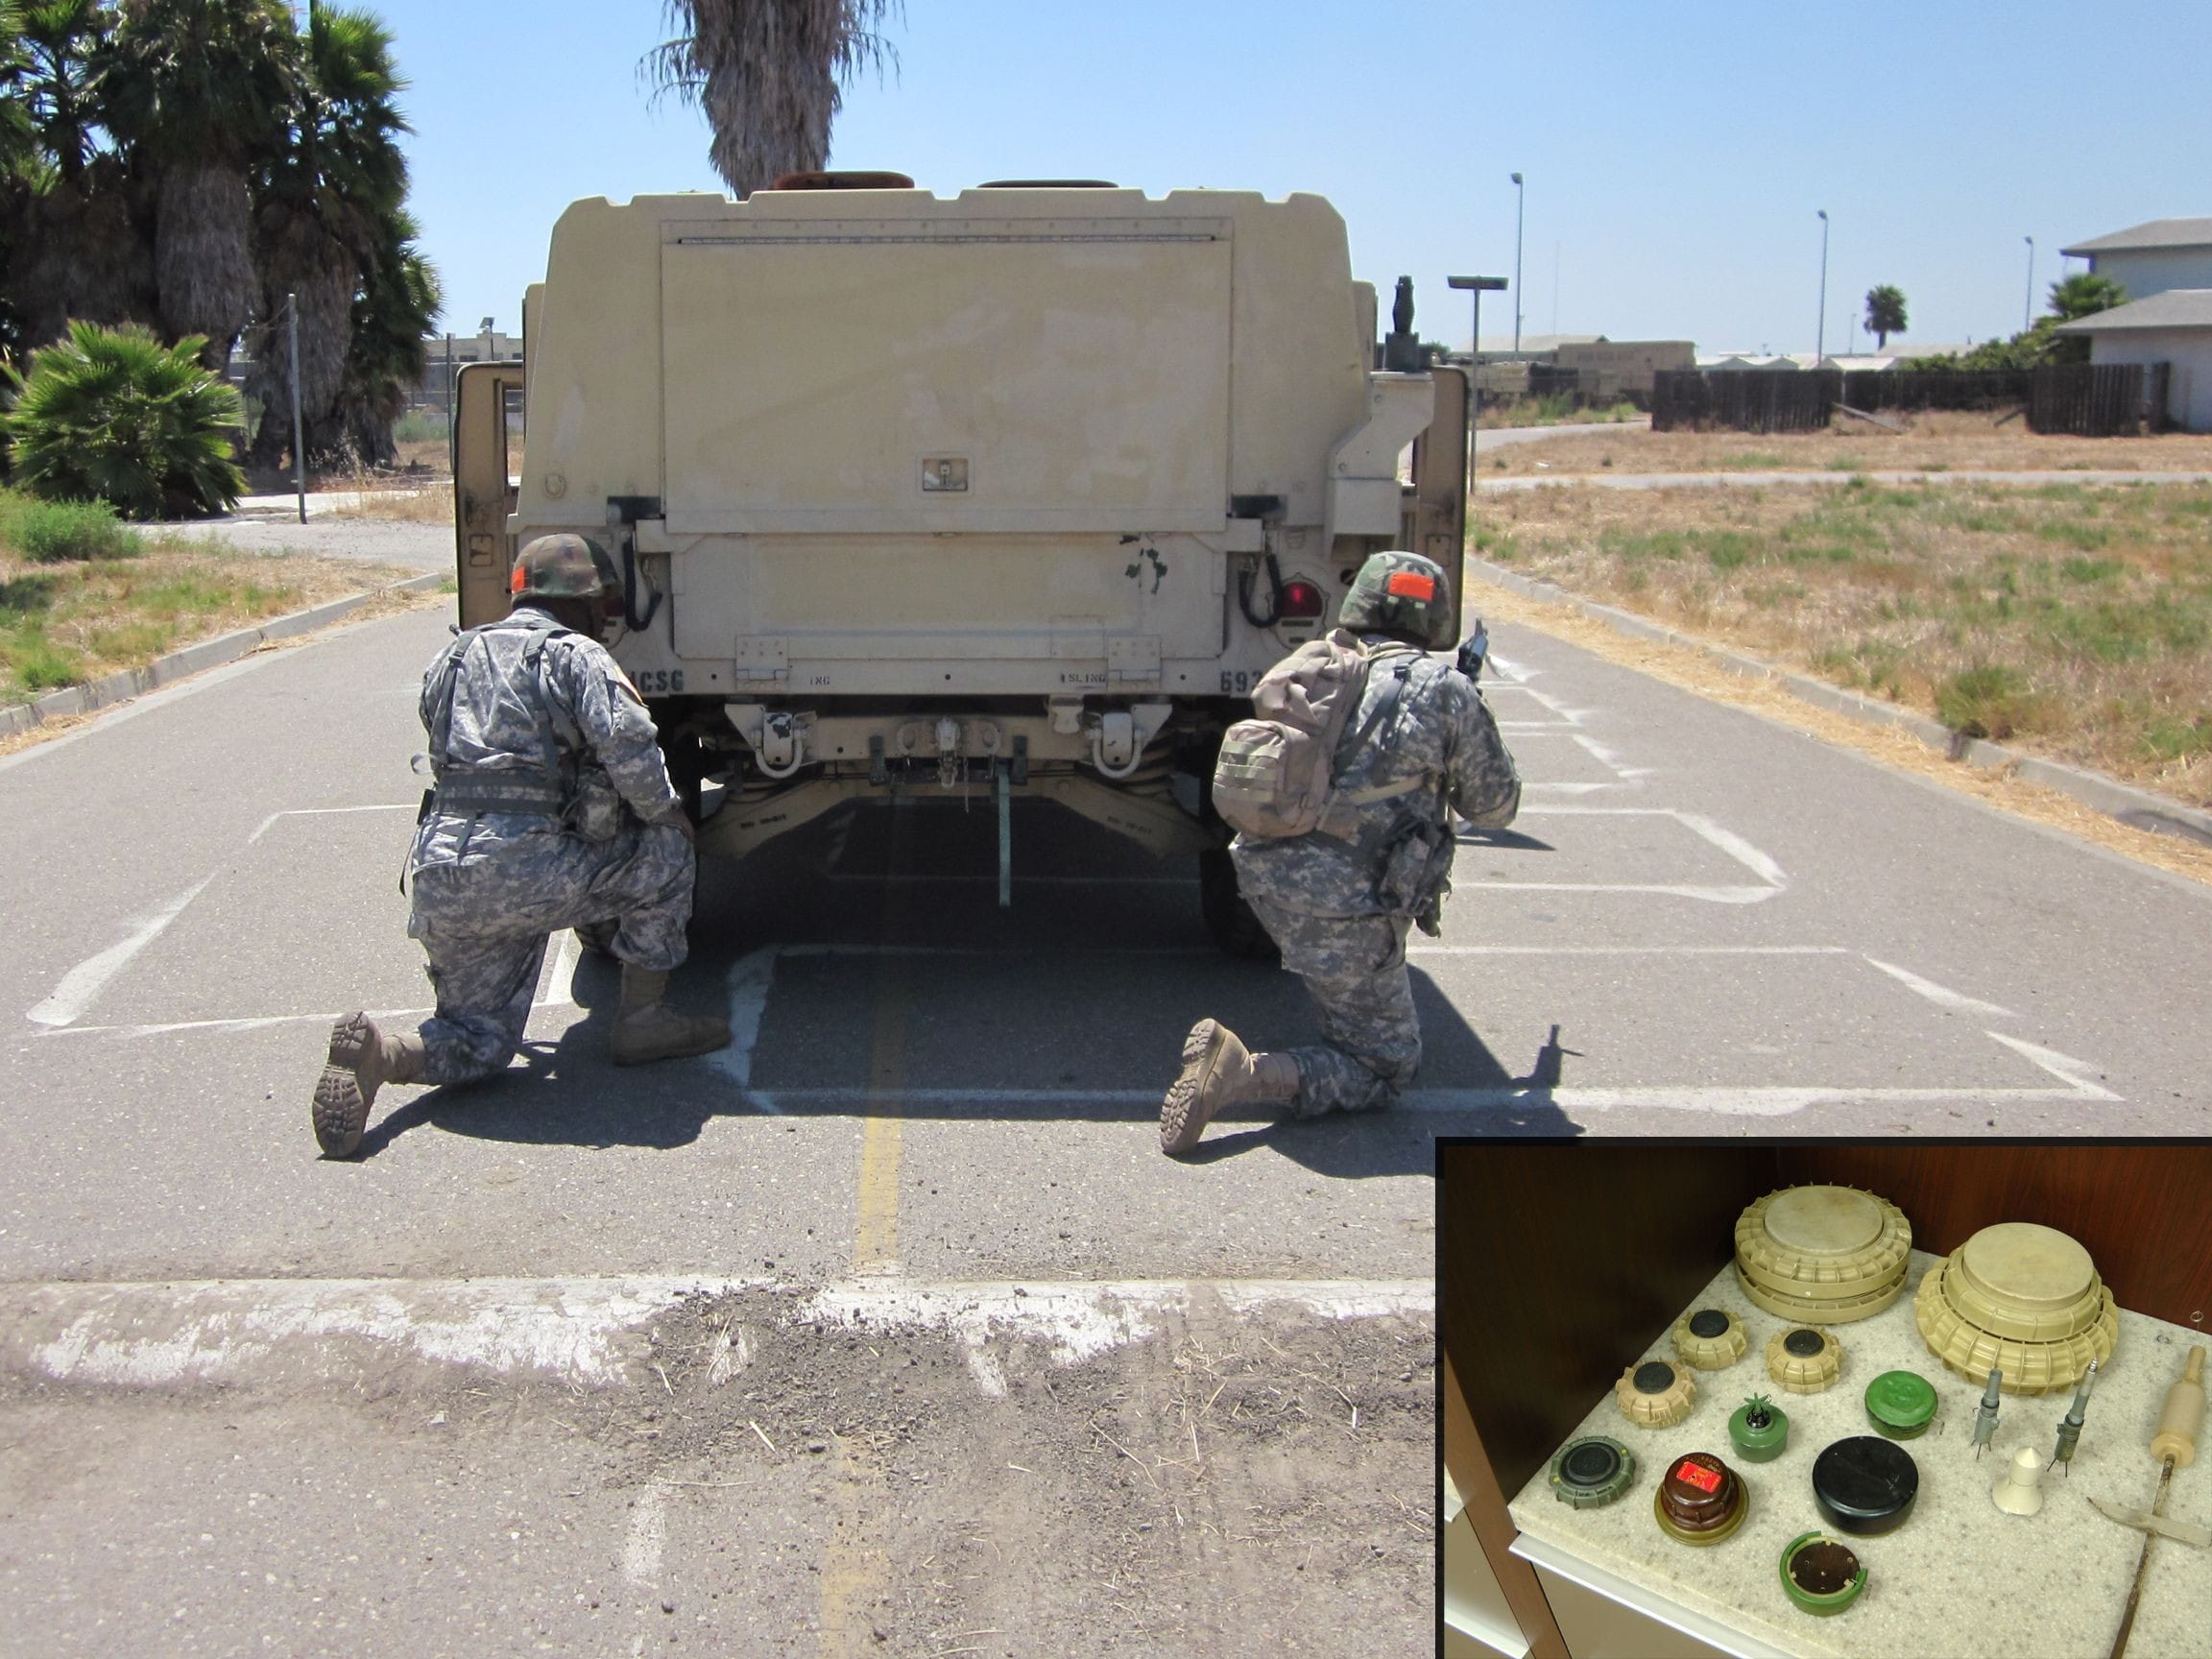 Staff Sergeant Wagner's U.S. Army students drove over a buried pressure plate (the dirt behind the vehicle) wired to an "explosive." They learned from it.